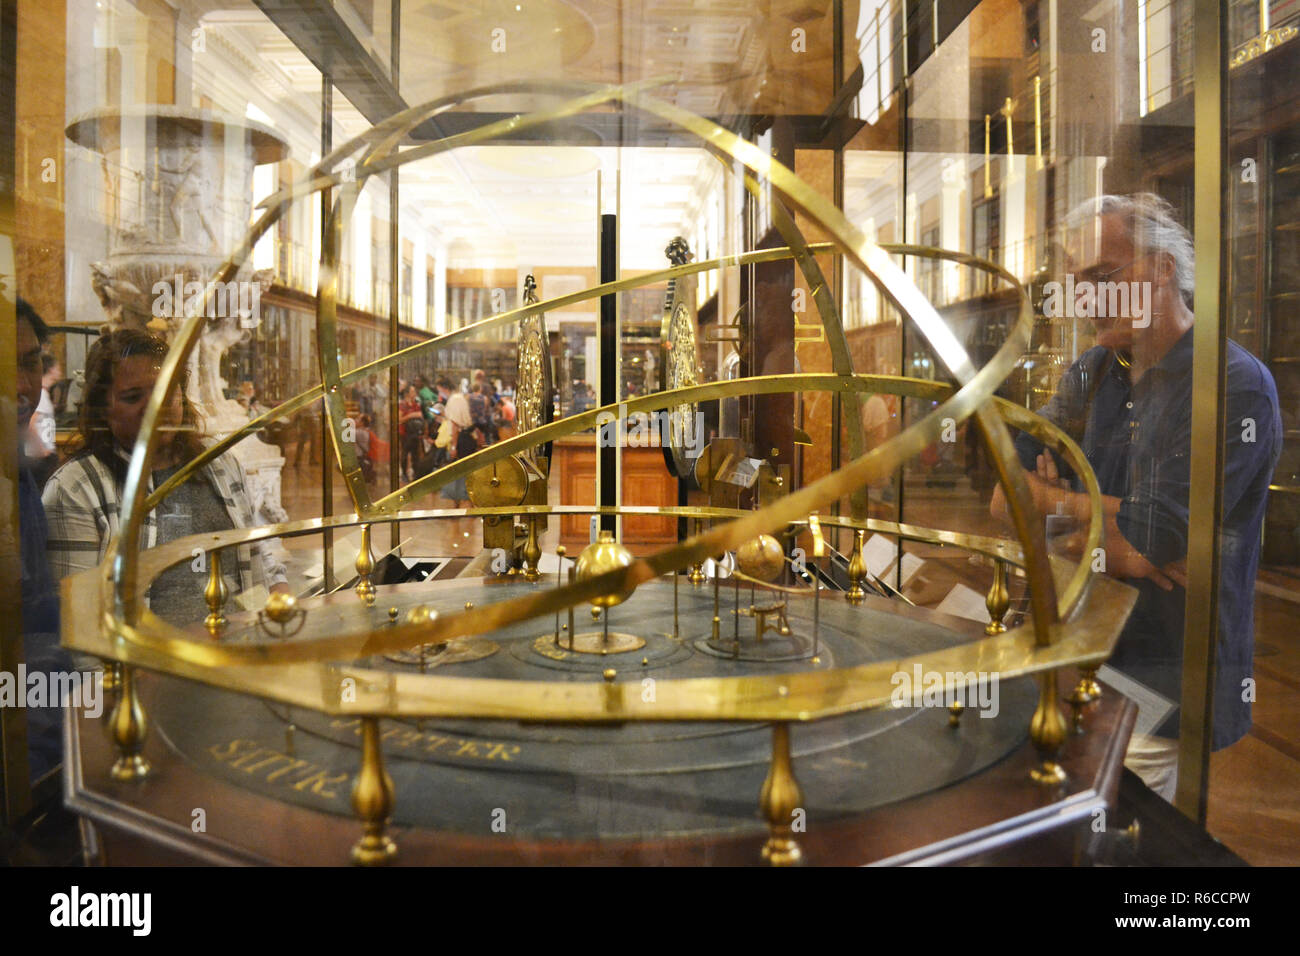 Orrery from 1750, similar design to George II's grand orrery. 'Age of Enlightenment' a permanent exhibition at The British Museum, London, England, UK Stock Photo